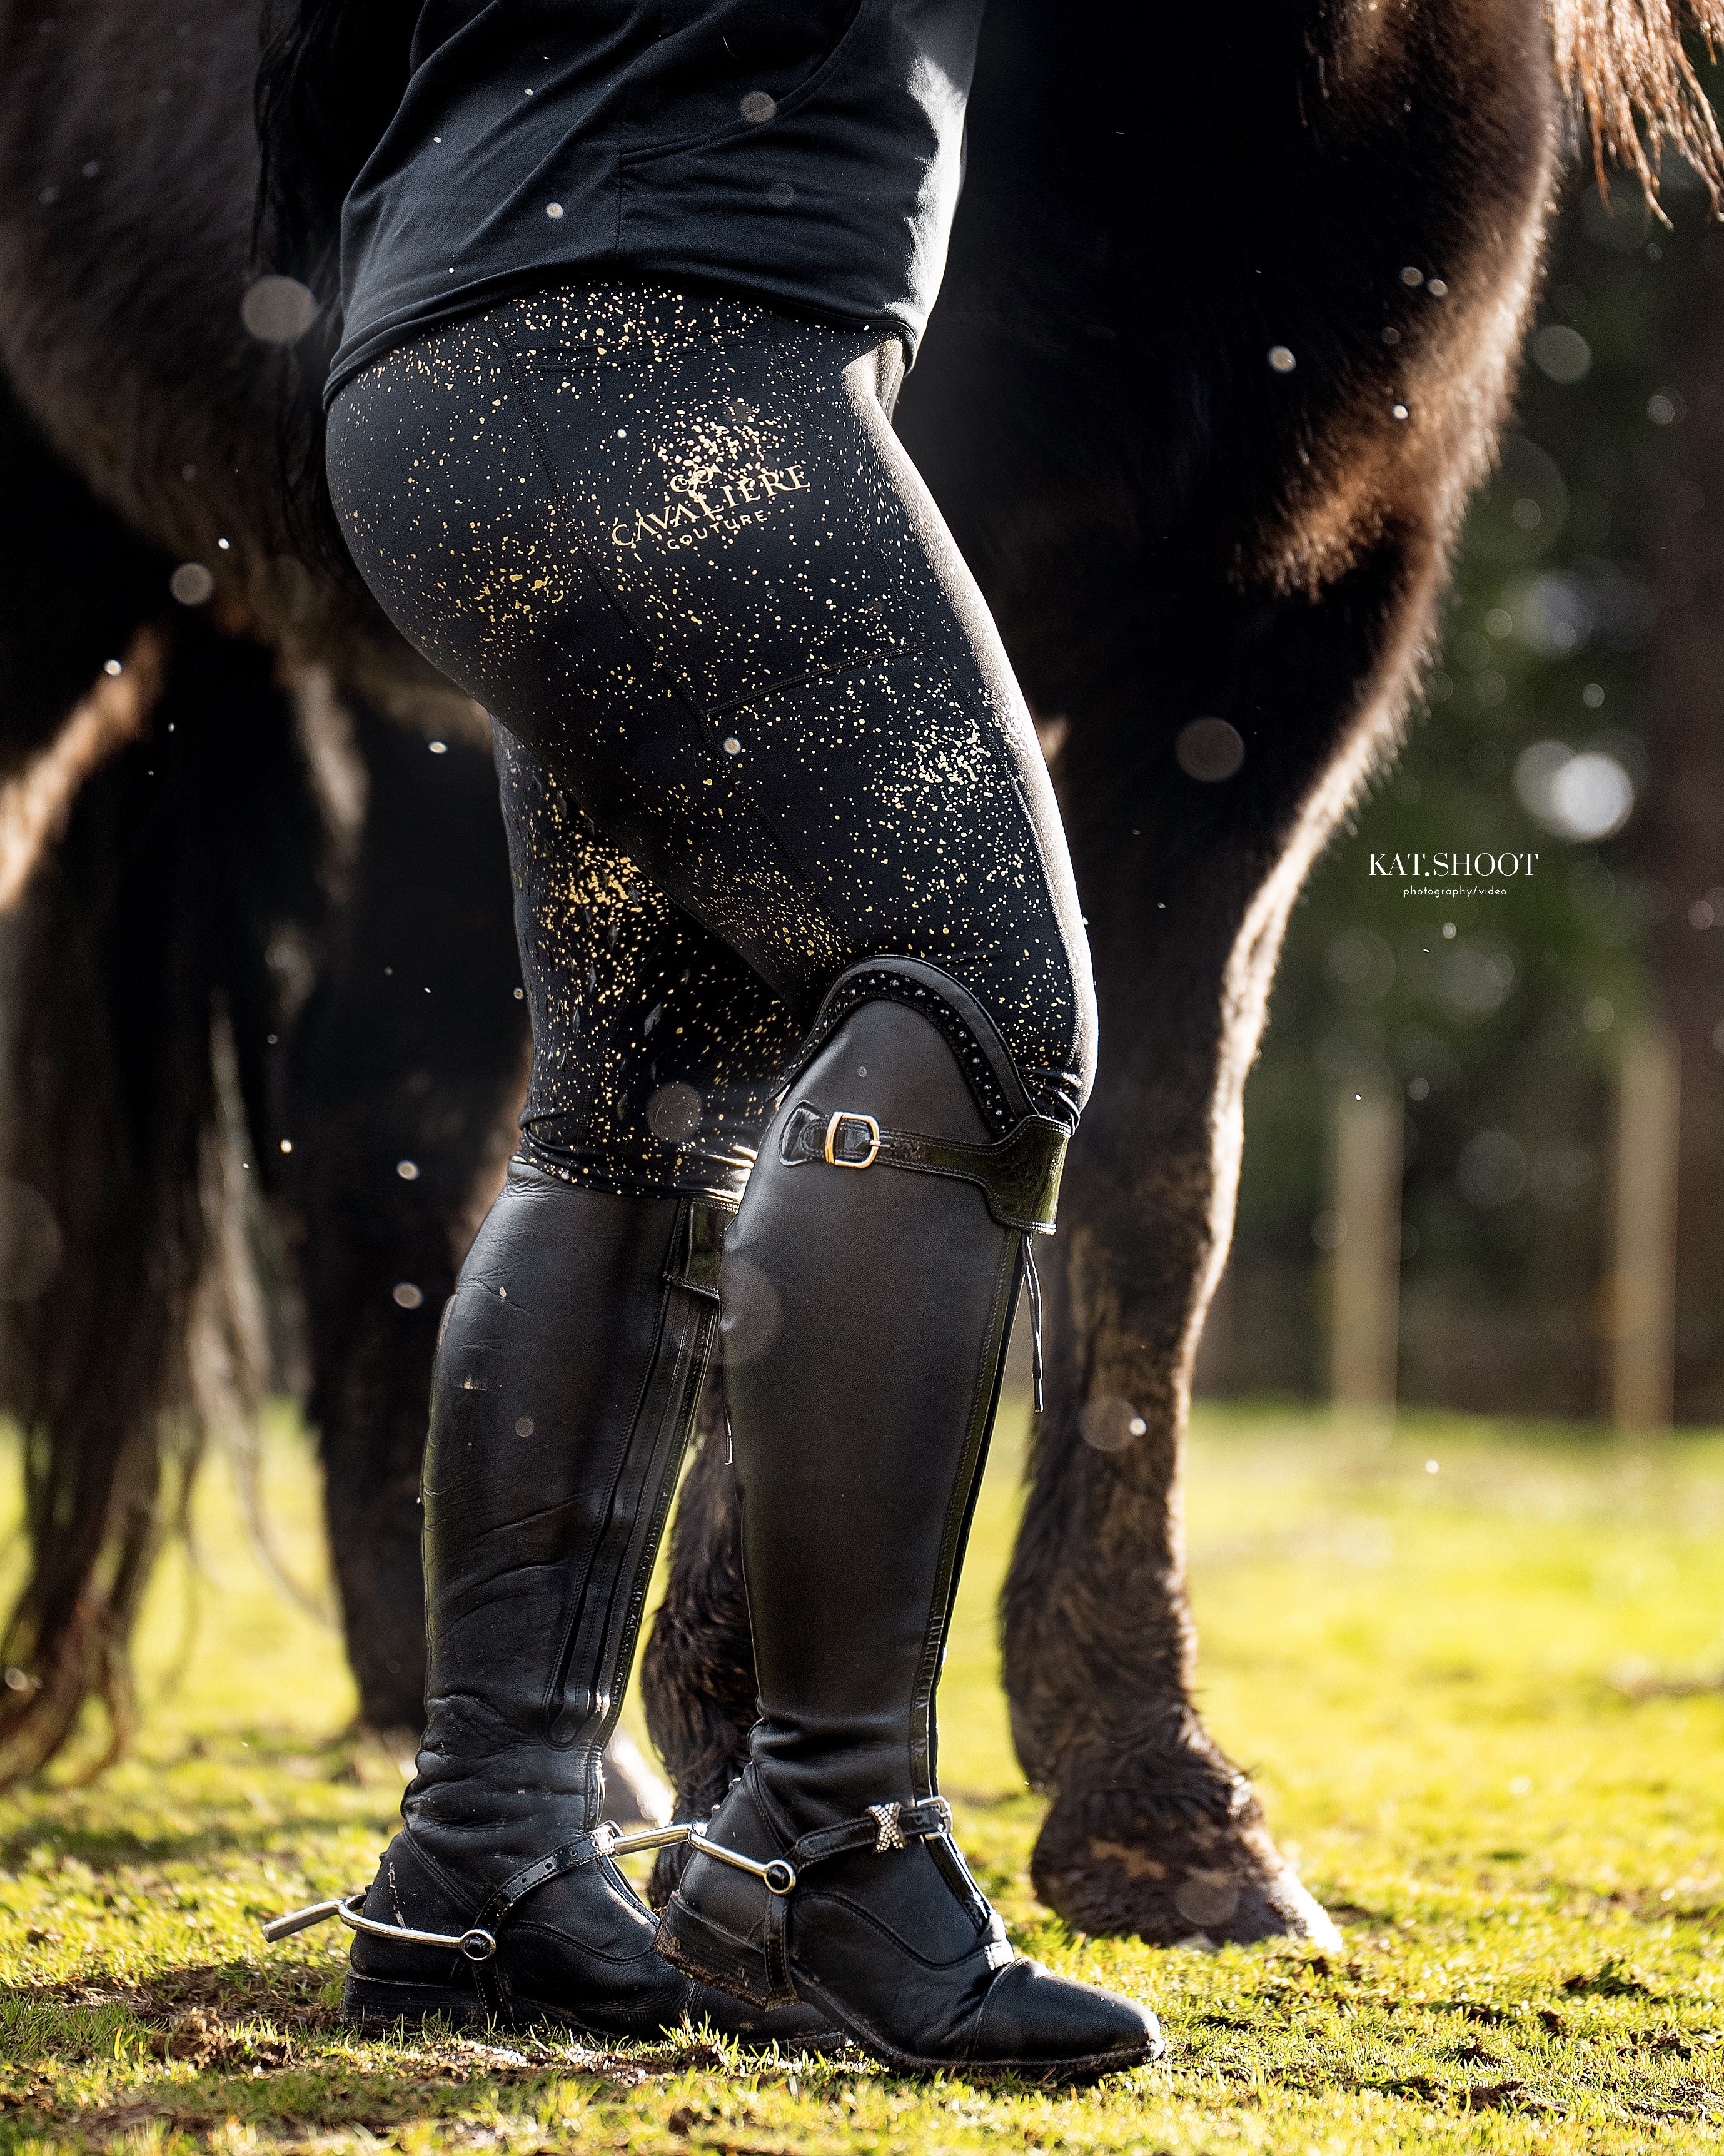 The Grand Prix Riding Tights in Slay Ride (Limited Edition)